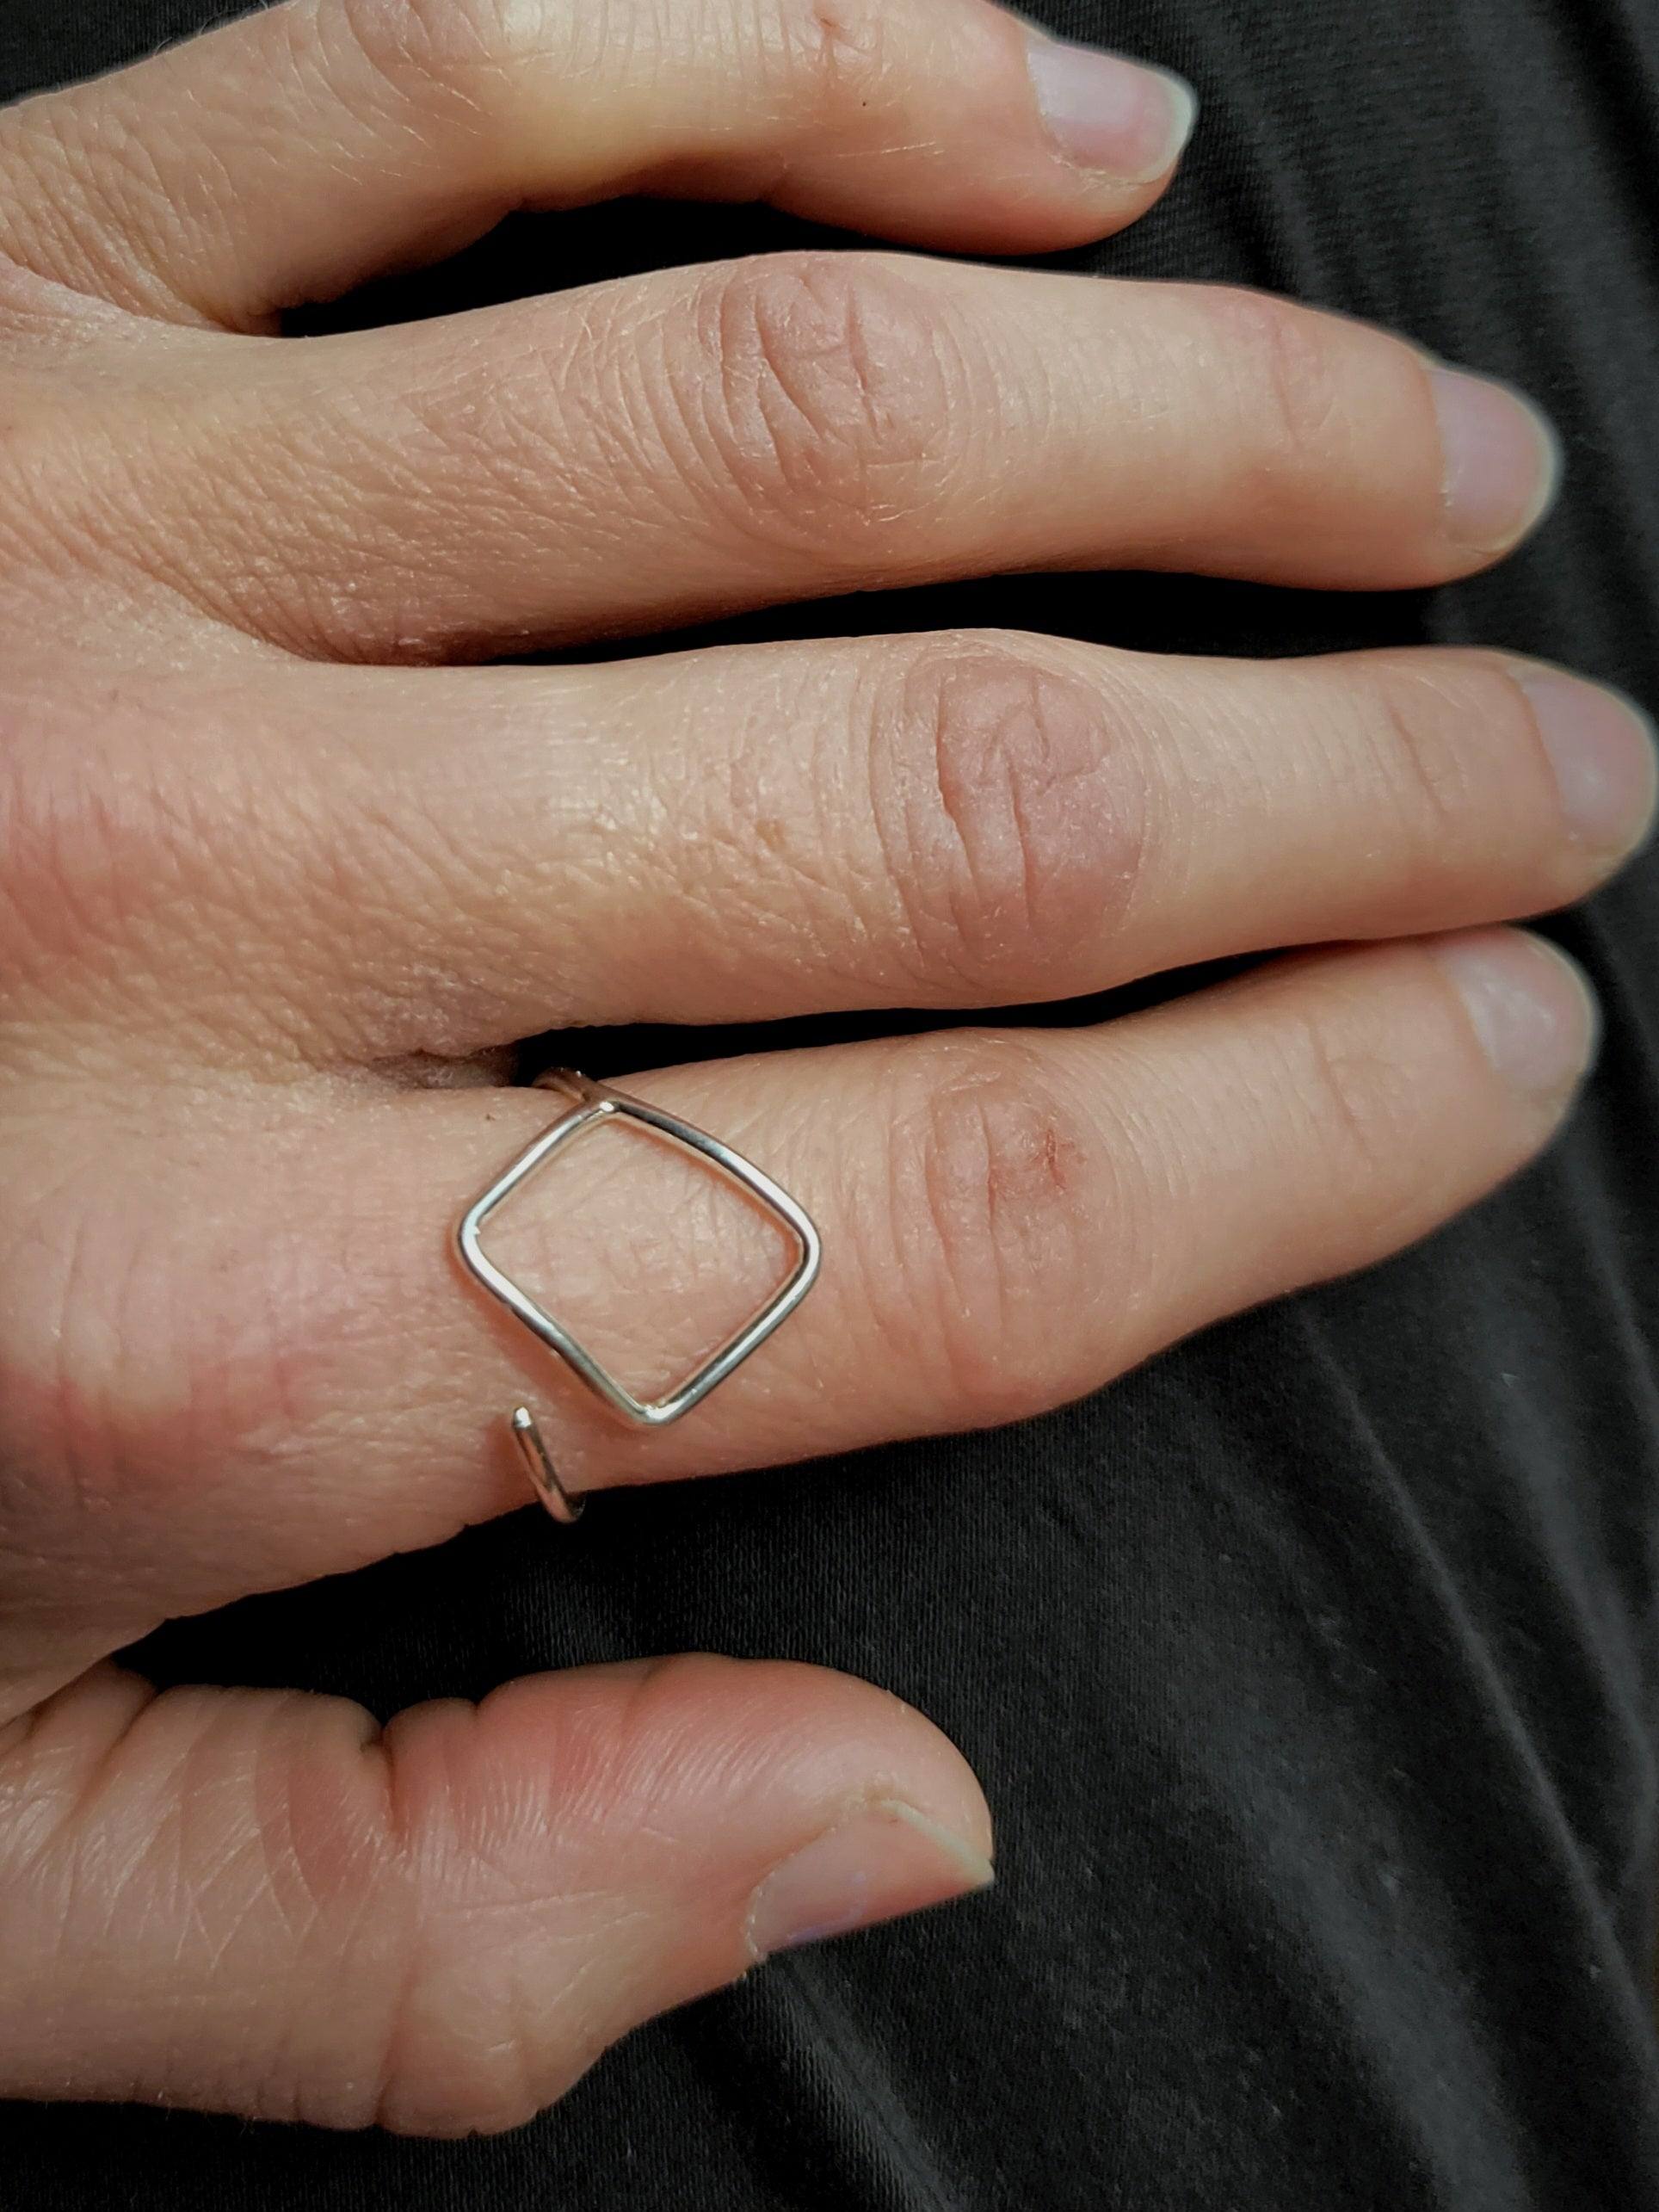 Box Breathing Ring - Cute rings that remind you to take Mindful Moments